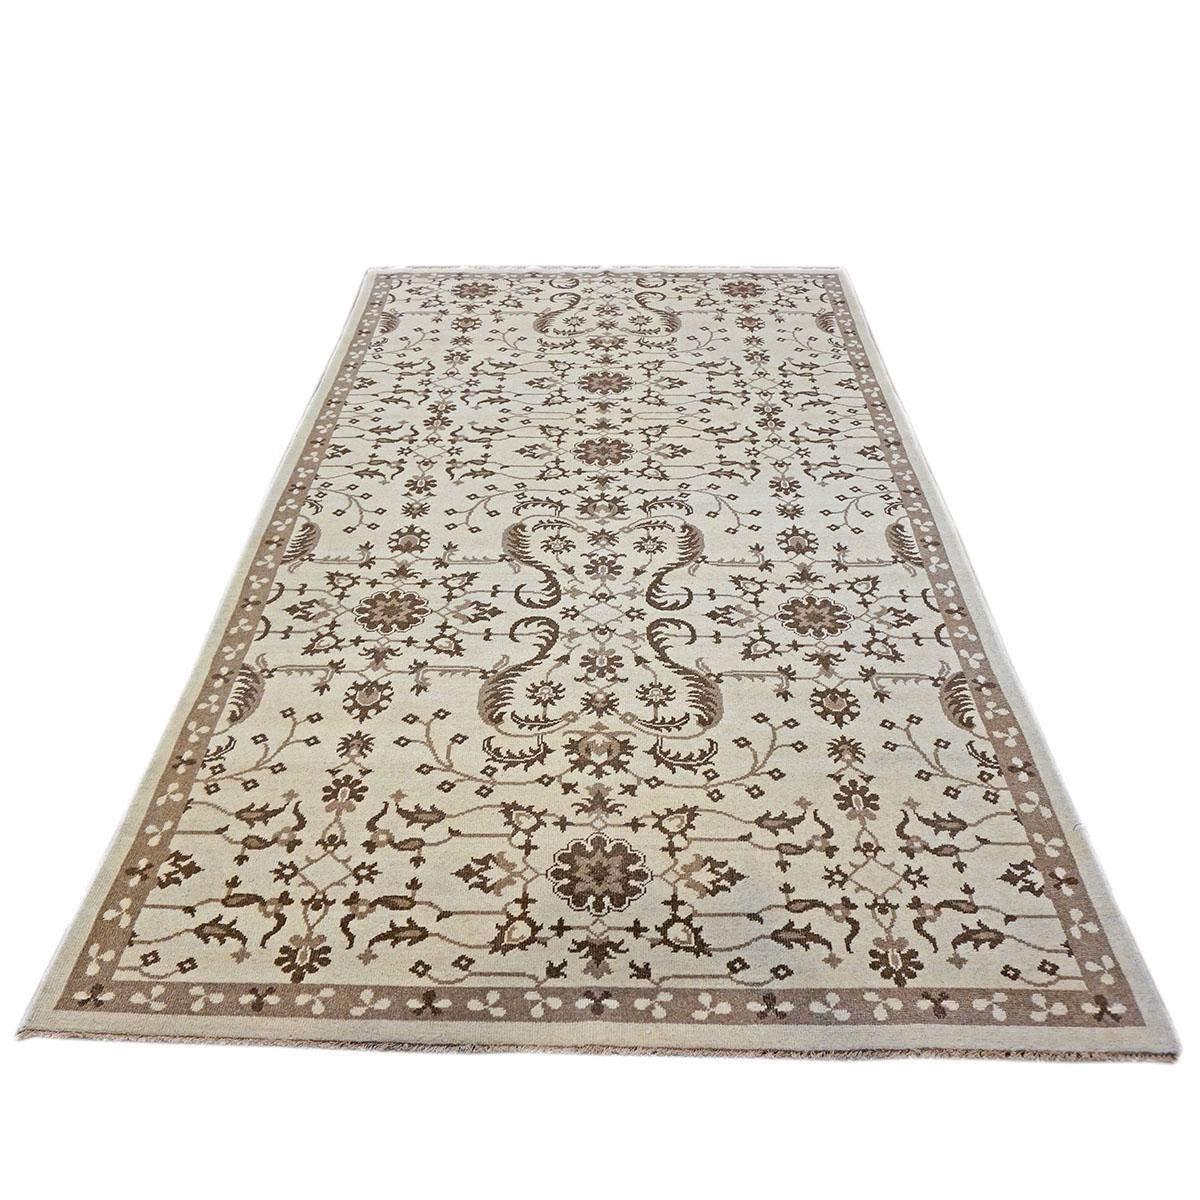 Ashly Fine Rugs presents an antique recreation of an original Persian Sultanabad 6x10 Ivory & Brown Handmade Area Rug. Part of our own previous production, this antique recreation was thought of and created in-house and 100% handmade in Afghanistan